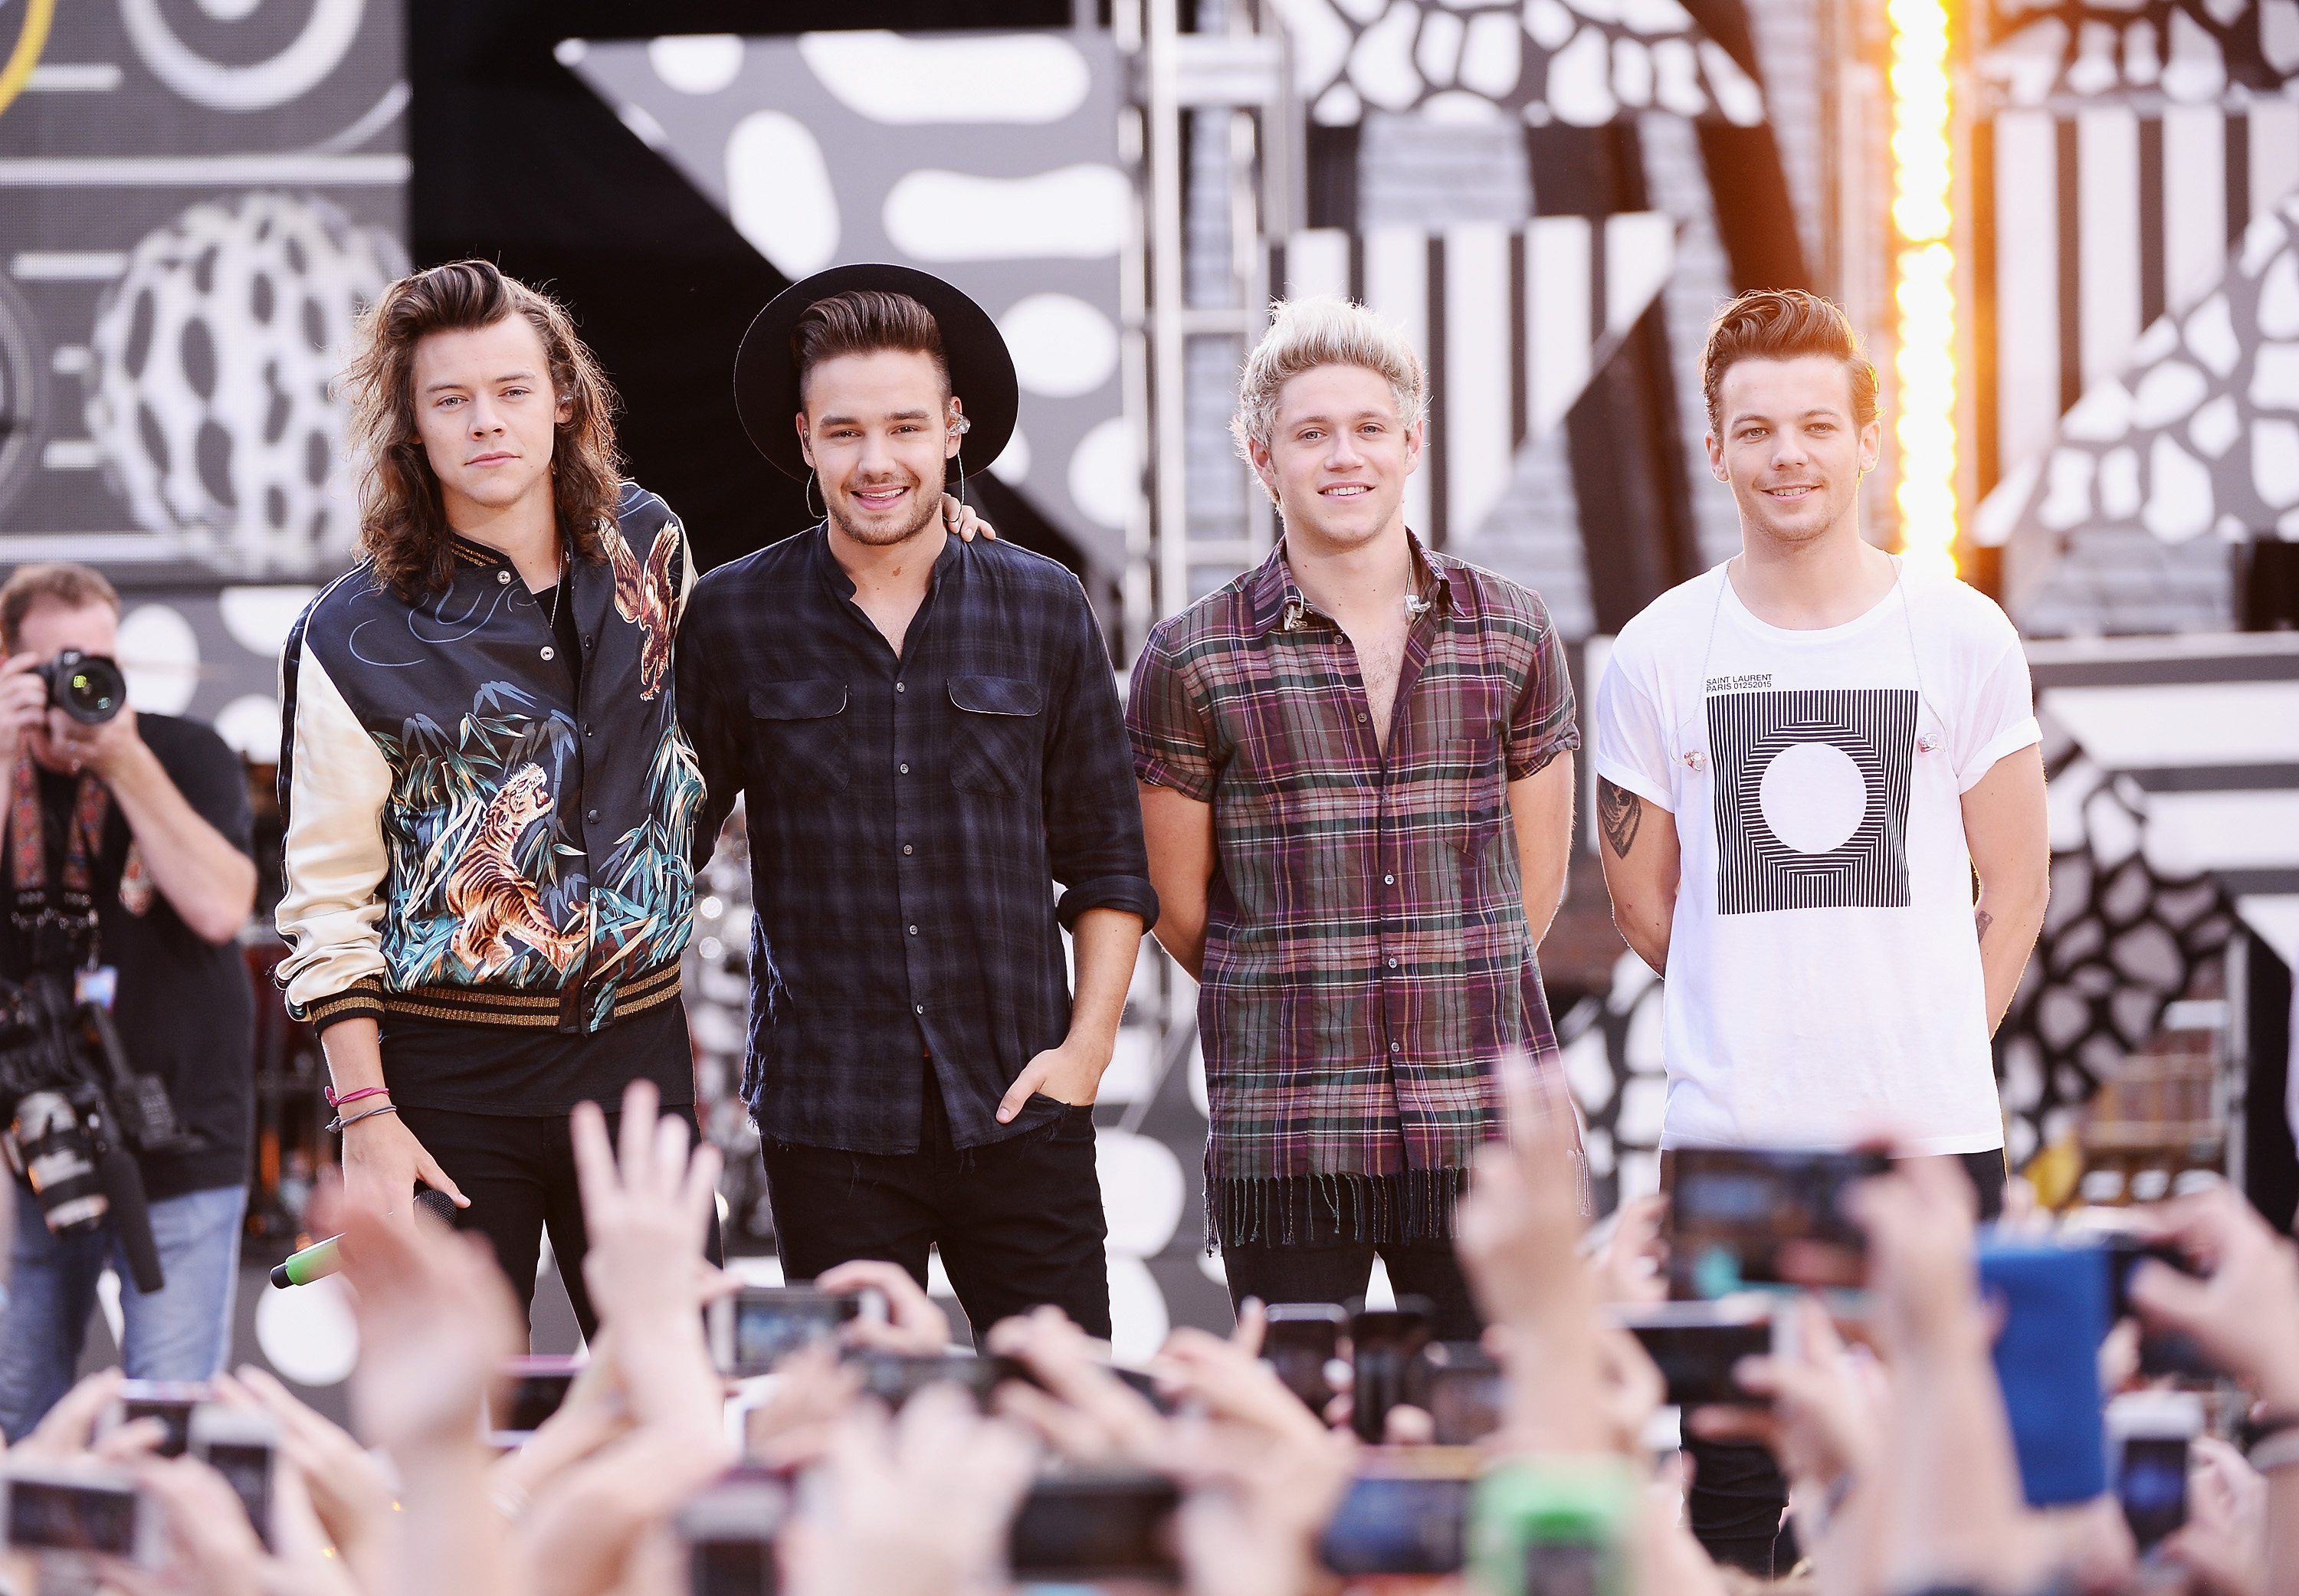 One Direction News, Harry Styles, Liam Payne, Niall Horan, and Louis Tomlinson, one direction tour